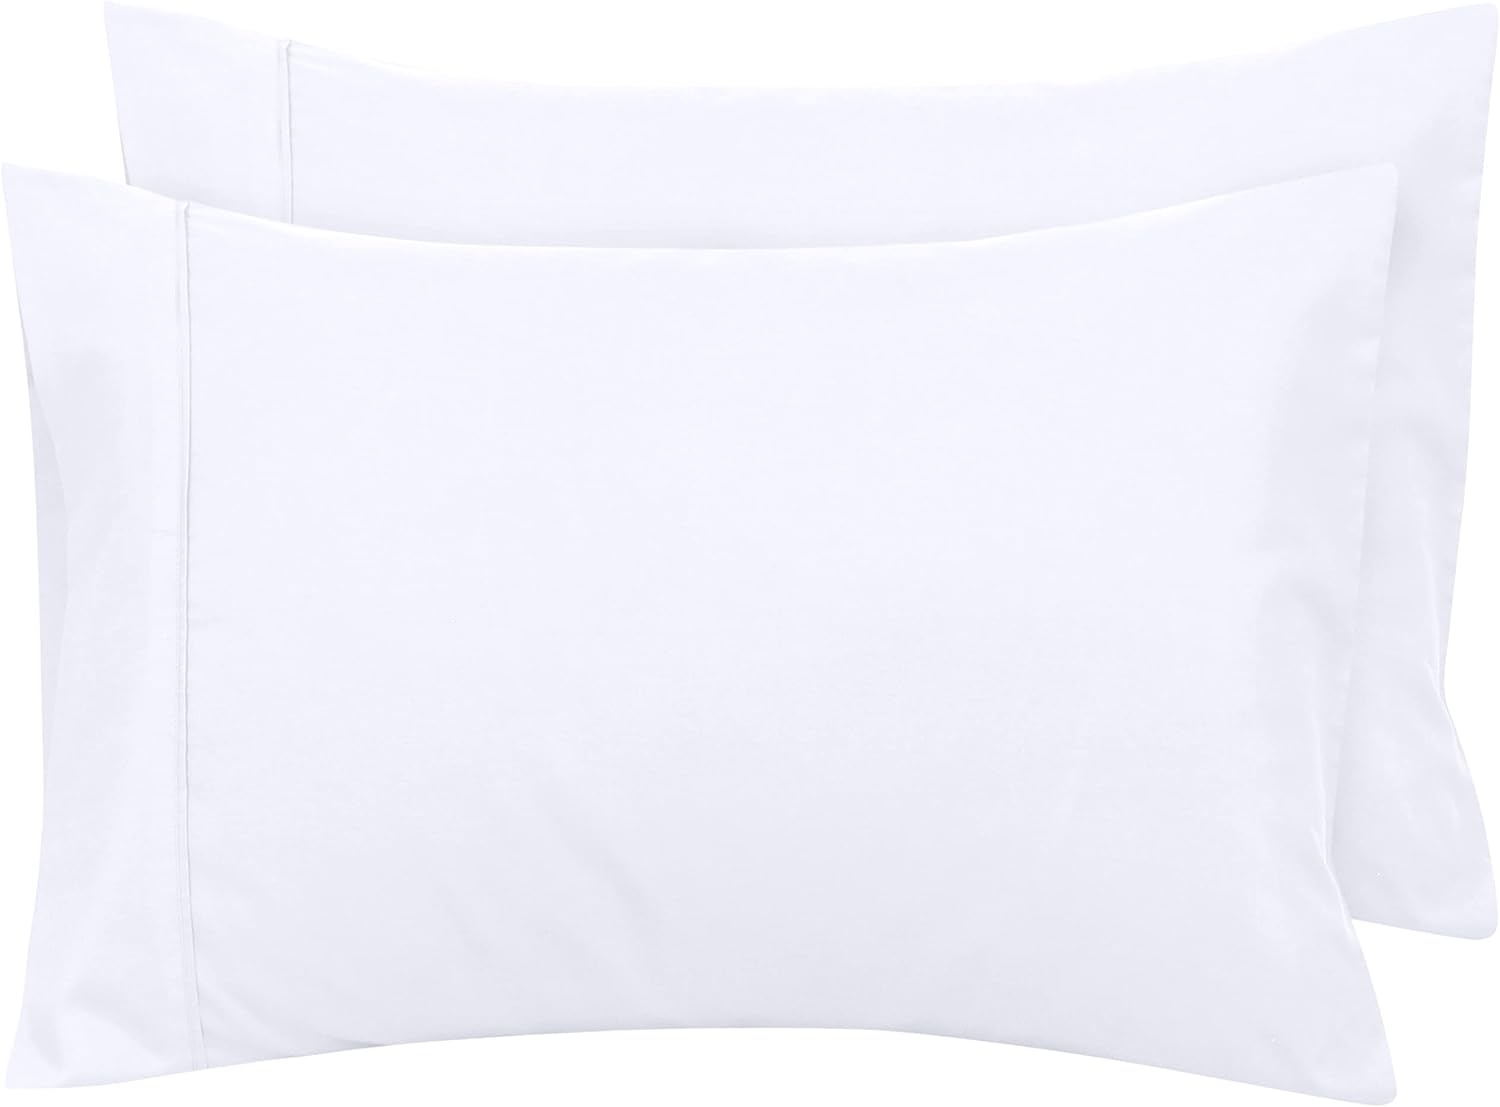 Queen Pillowcase offers a range of elegant and comfortable pillowcases of exceptional quality. Select styles such as Queen Size Pillow Cases and White Pillowcases are available to meet your quest for a high quality of life.